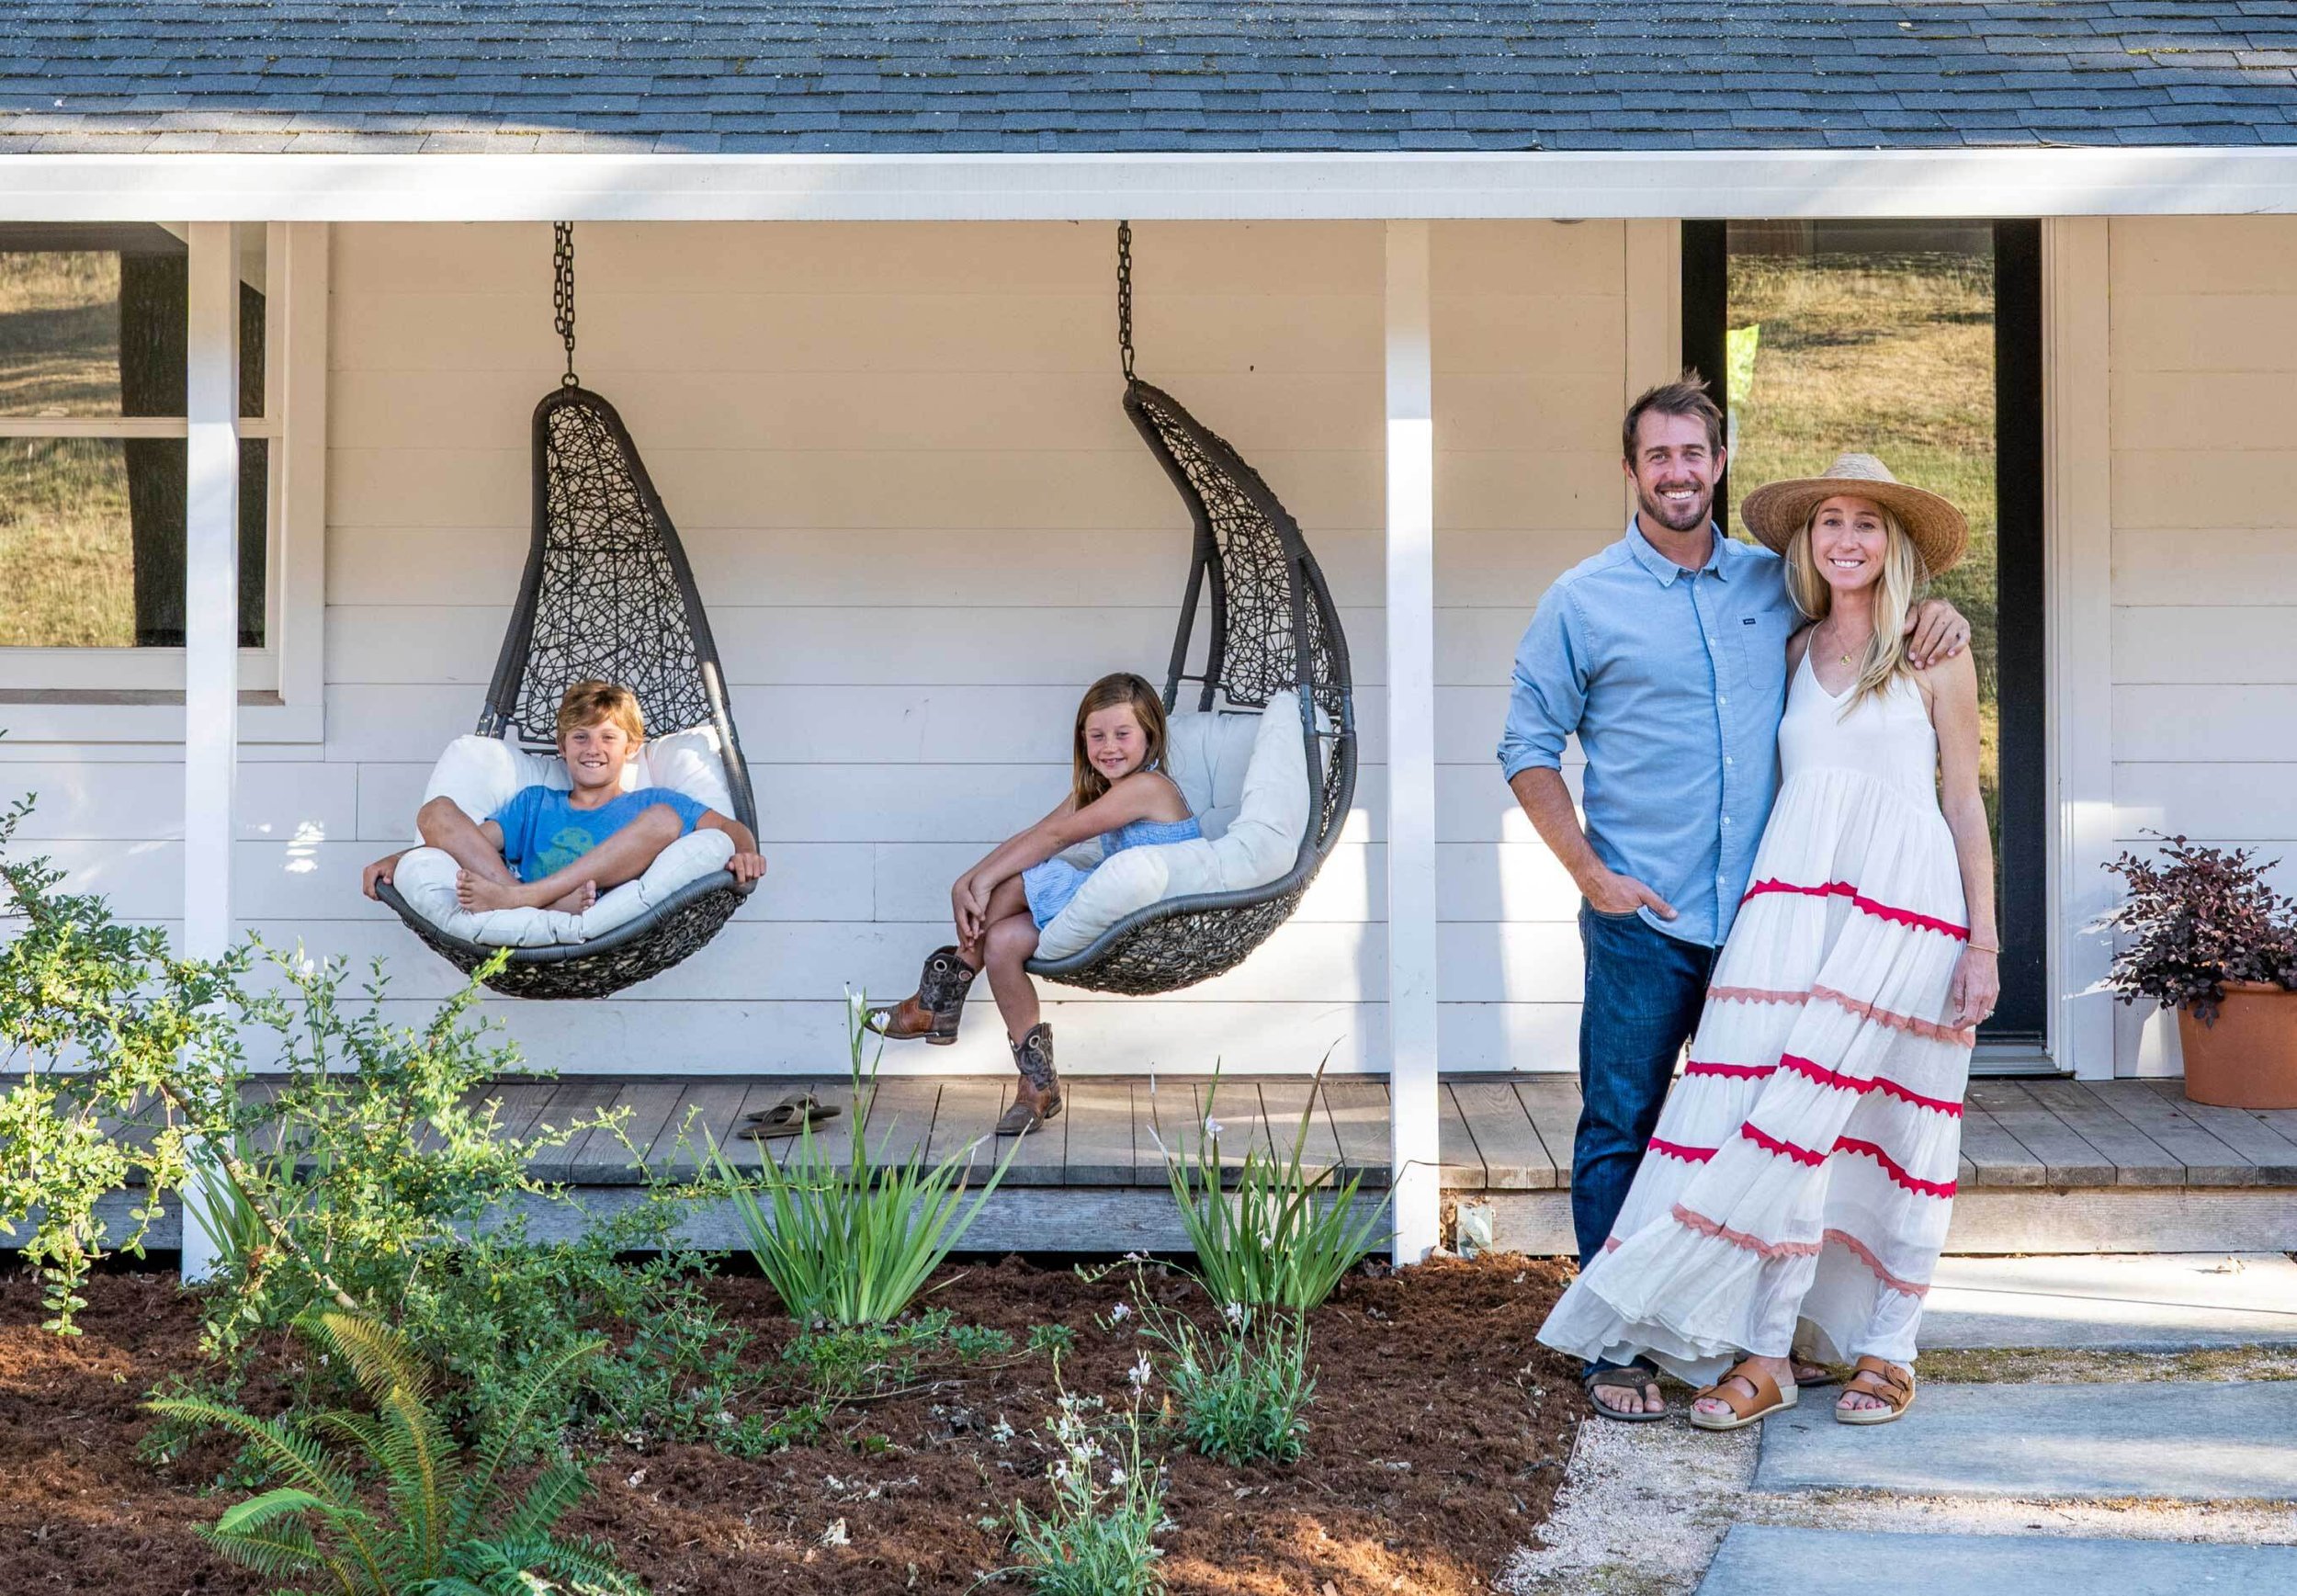 Yardzen cofounders and family in front yard of Calistoga home